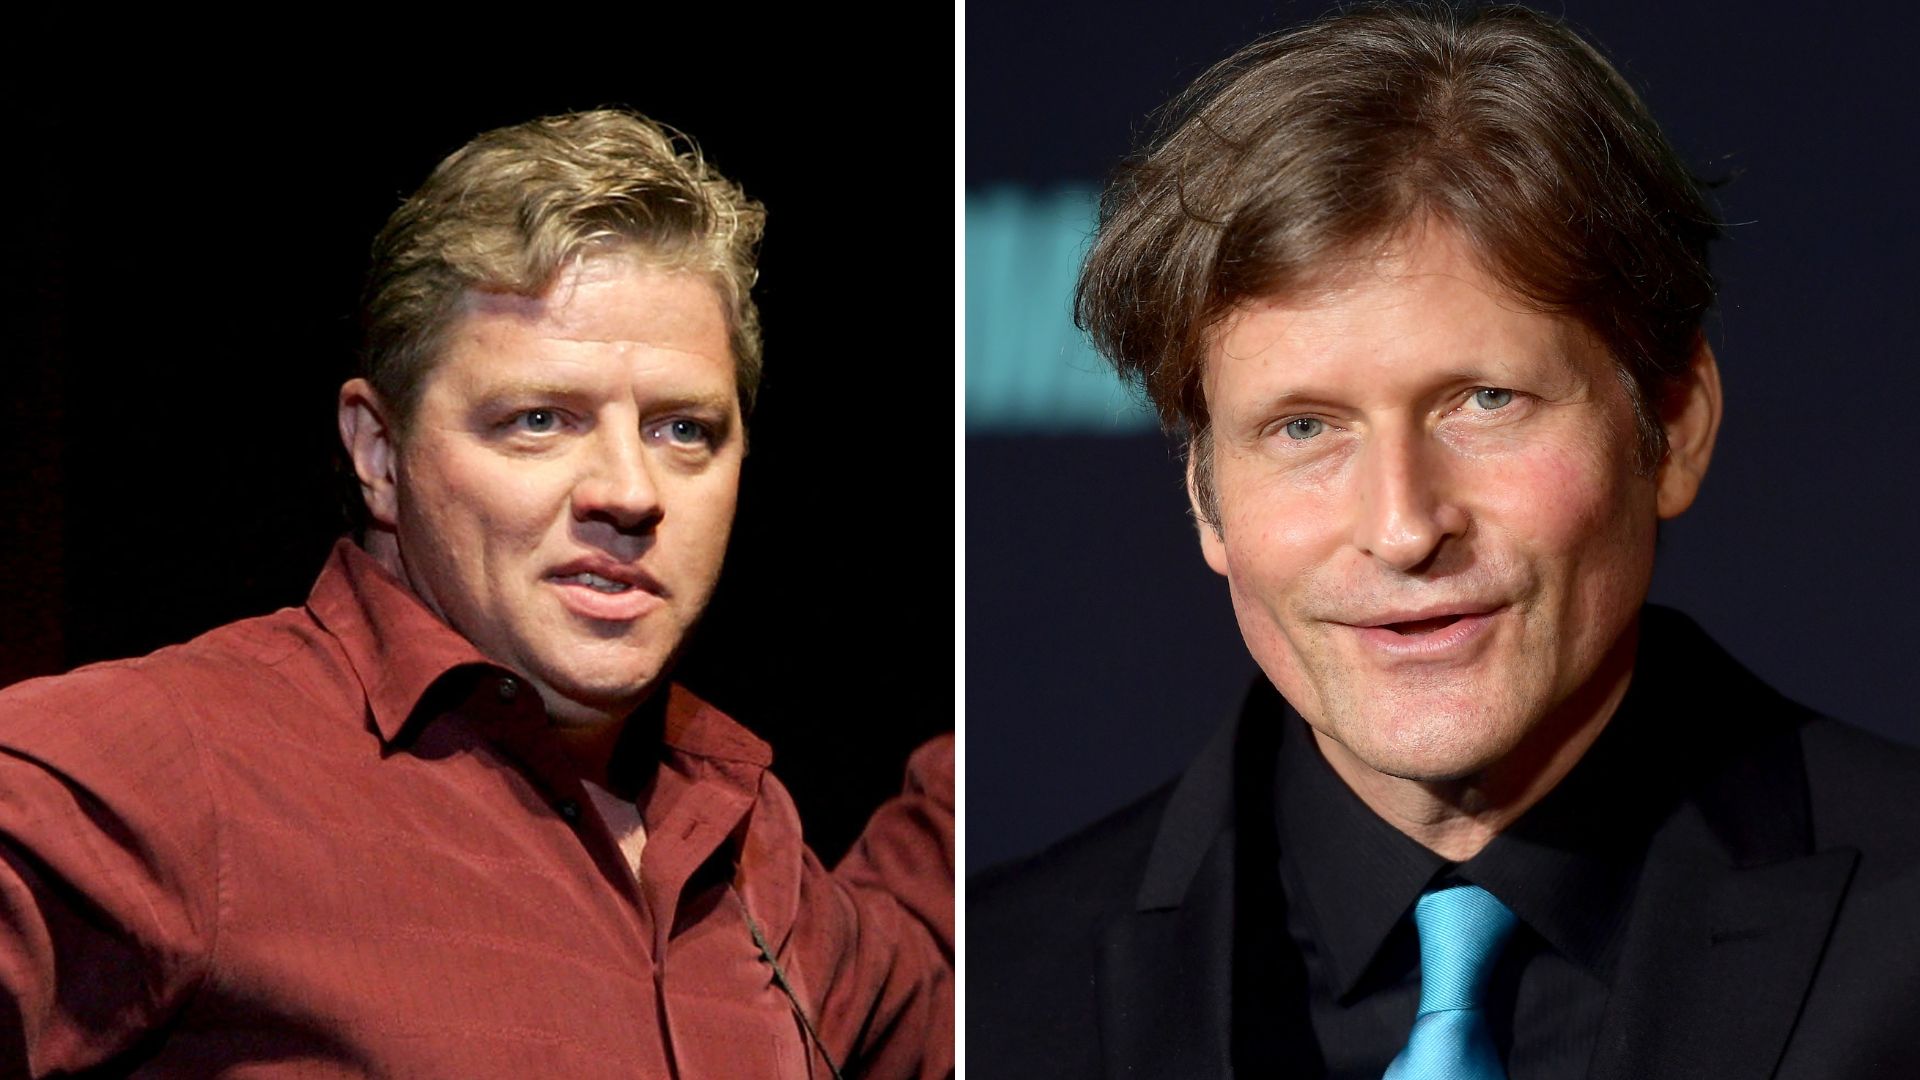 Left: Actor Tom Wilson performs onstage in May 2005, (Frazer Harrison, Getty Images) Right: Crispin...